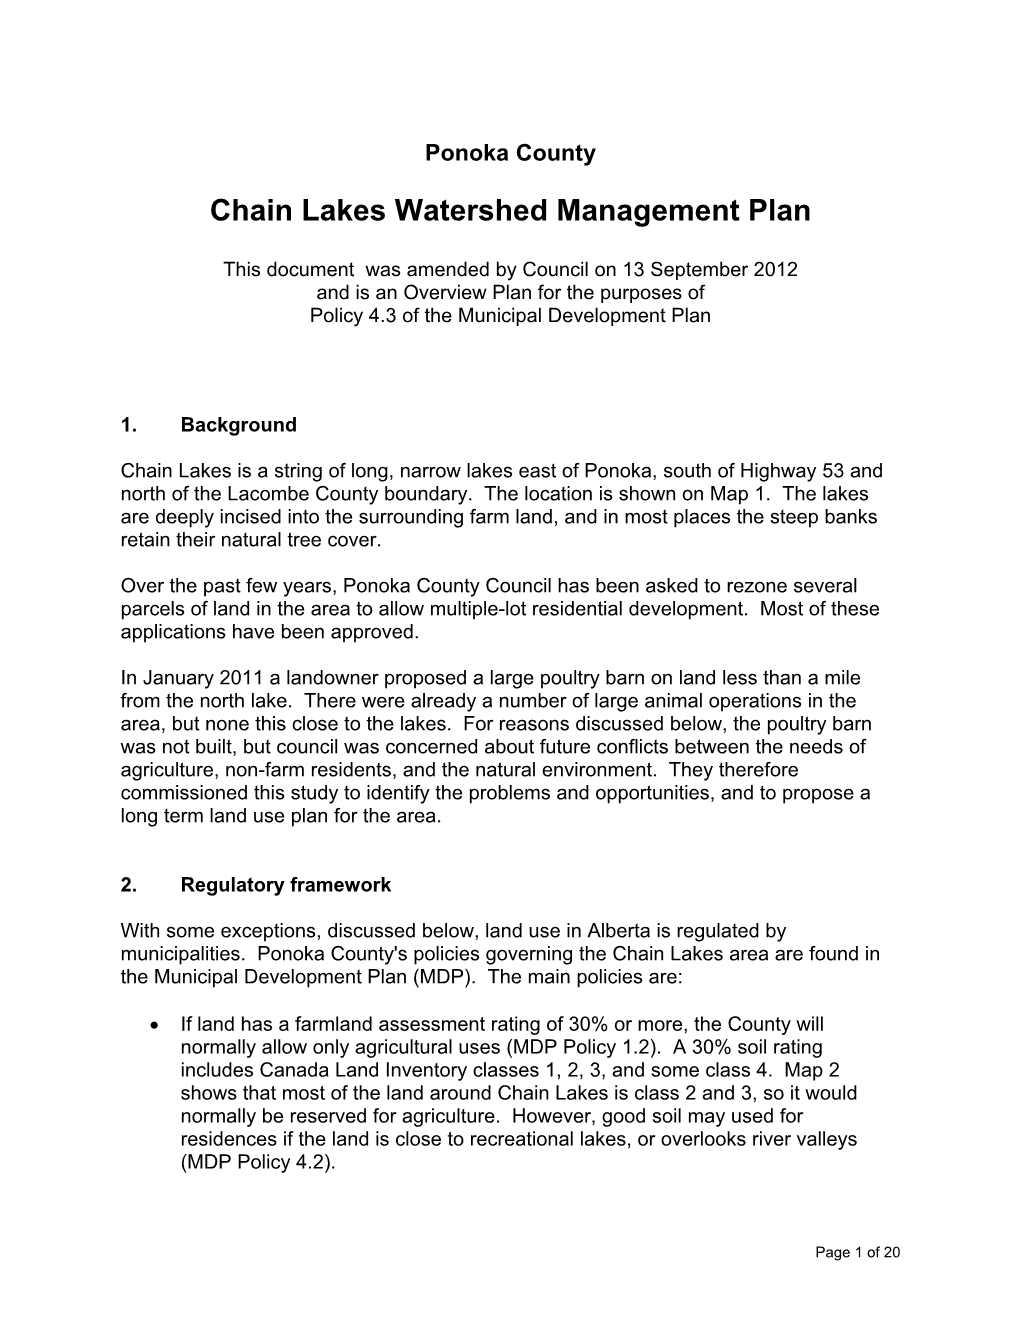 Chain Lakes Watershed Management Plan